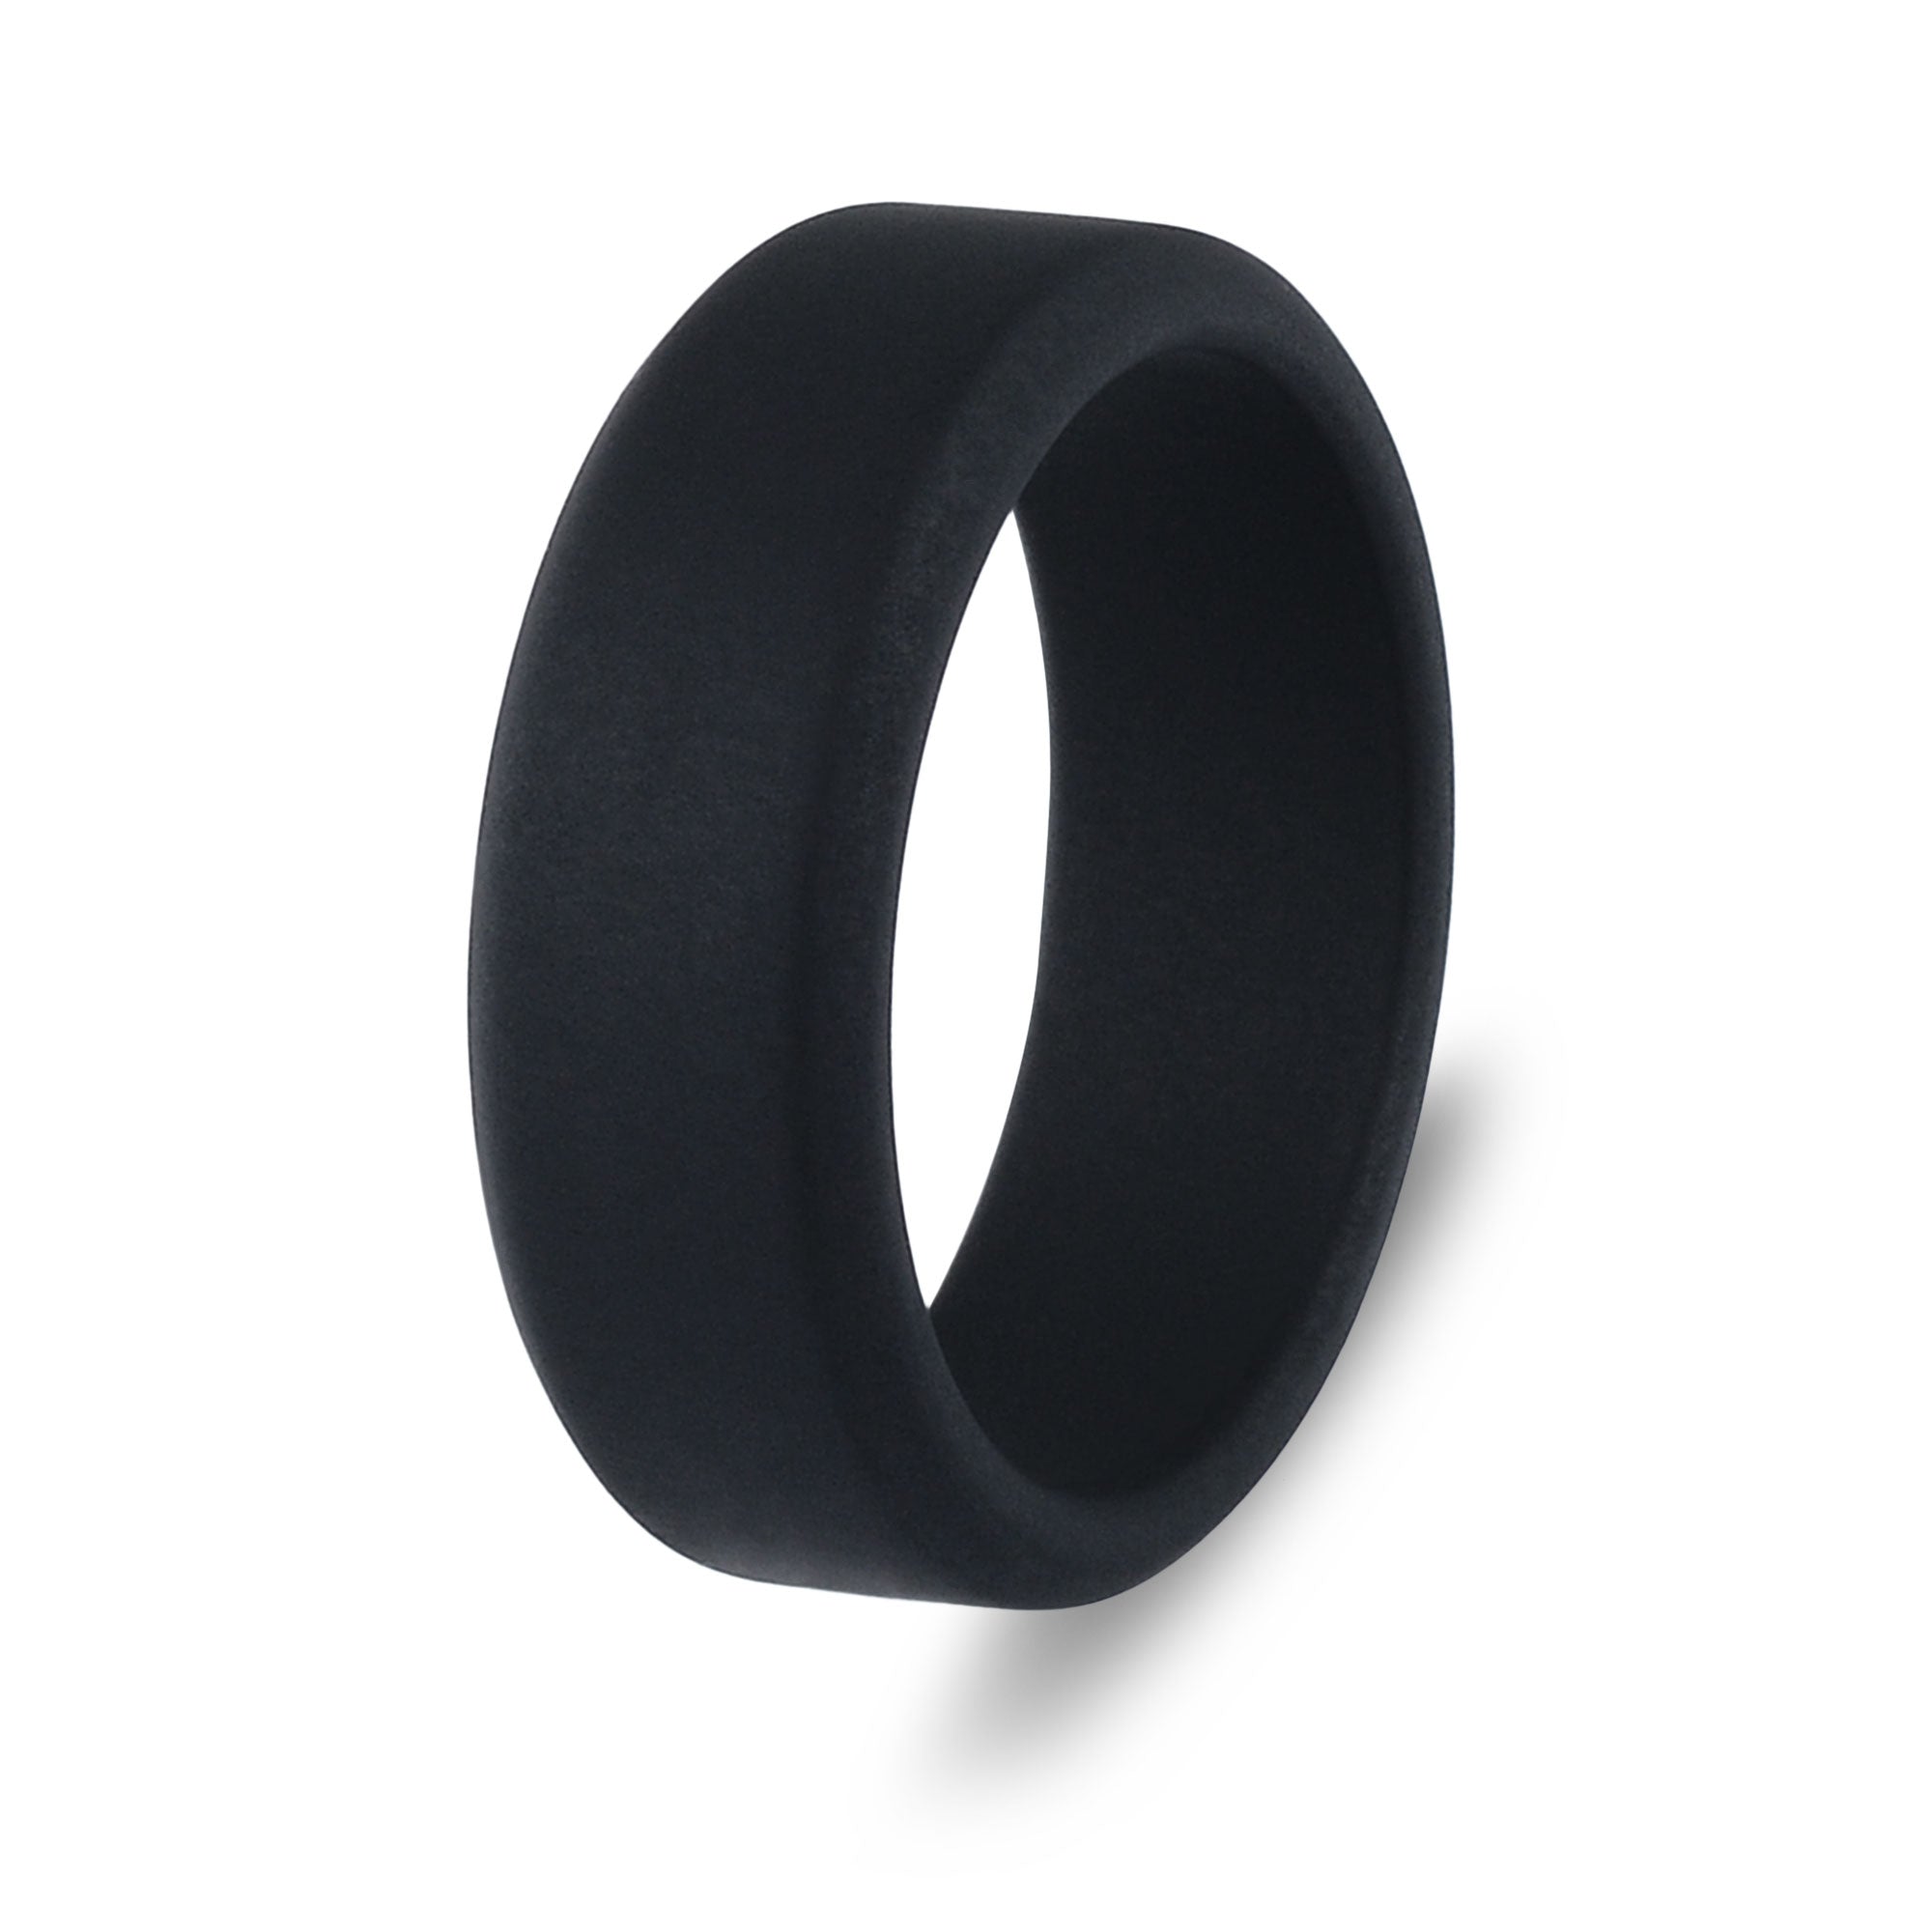 The Obsidian - Silicone Ring